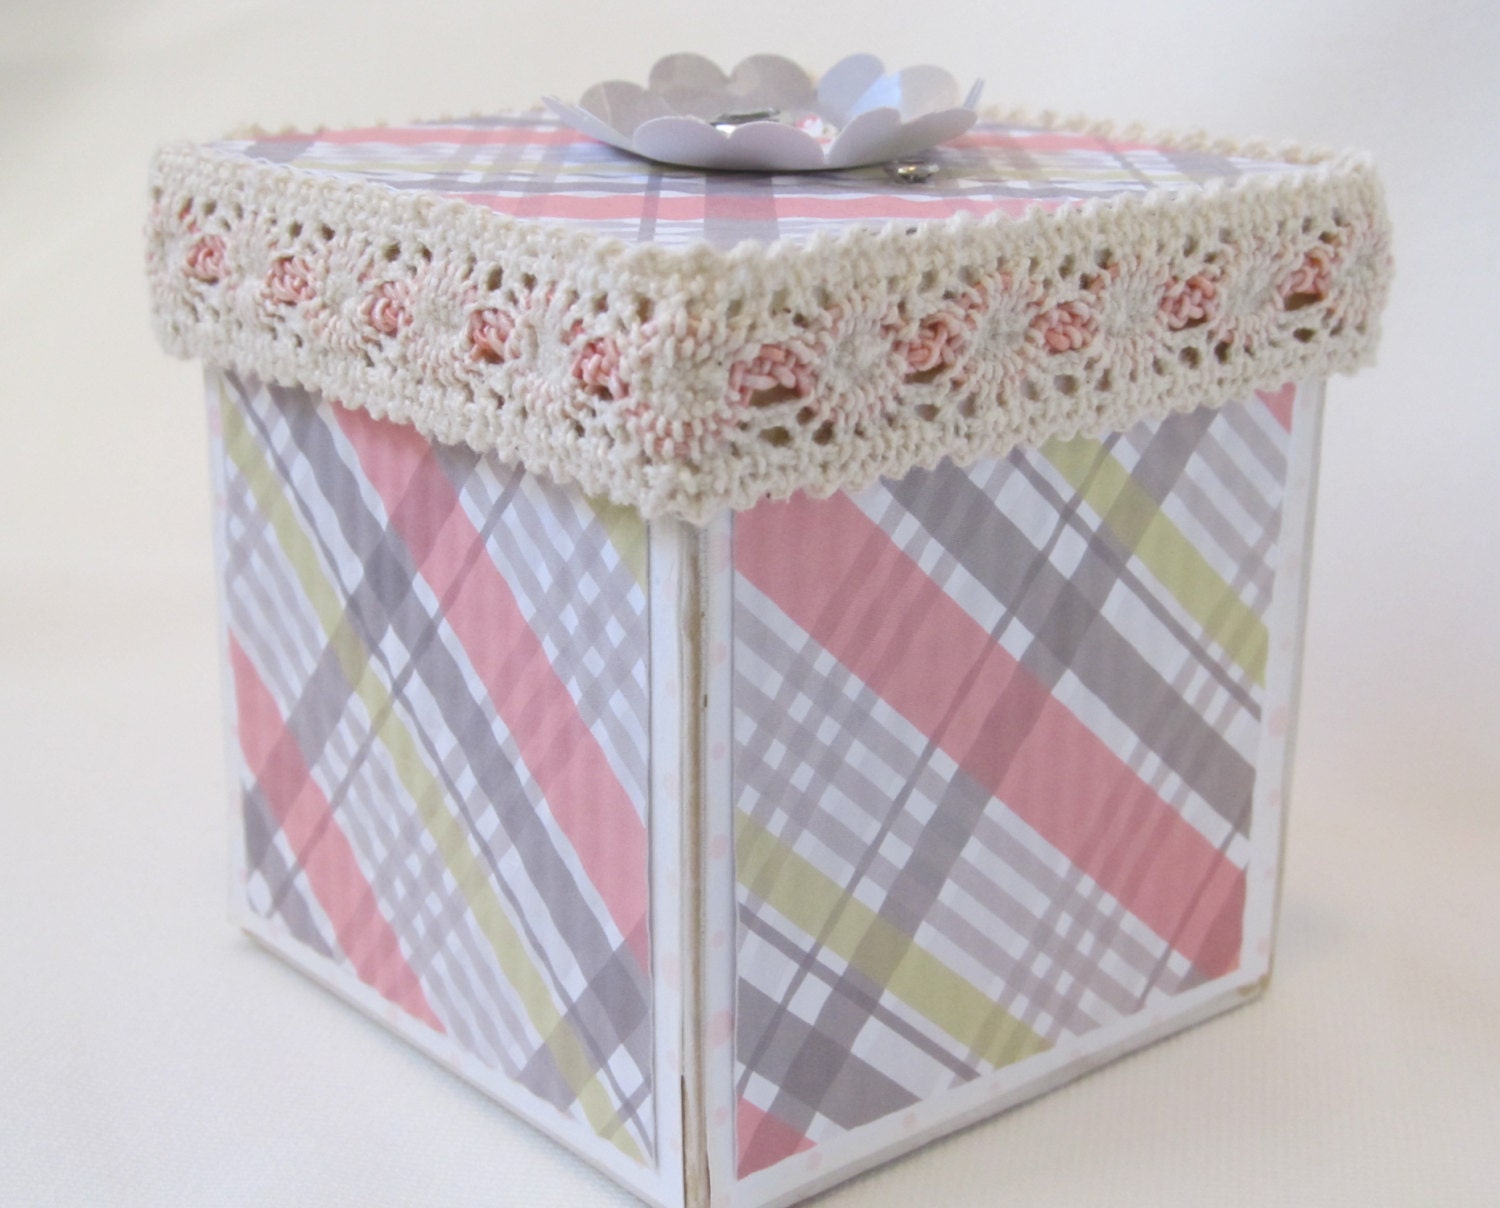 Repurposed Box - Decorative Box - Cottage Chic Style - Modern Flair - Pink and White Box - Gift Box - Vintage Lace Trim - Soft Grey Accents - PrettyByrdDesigns